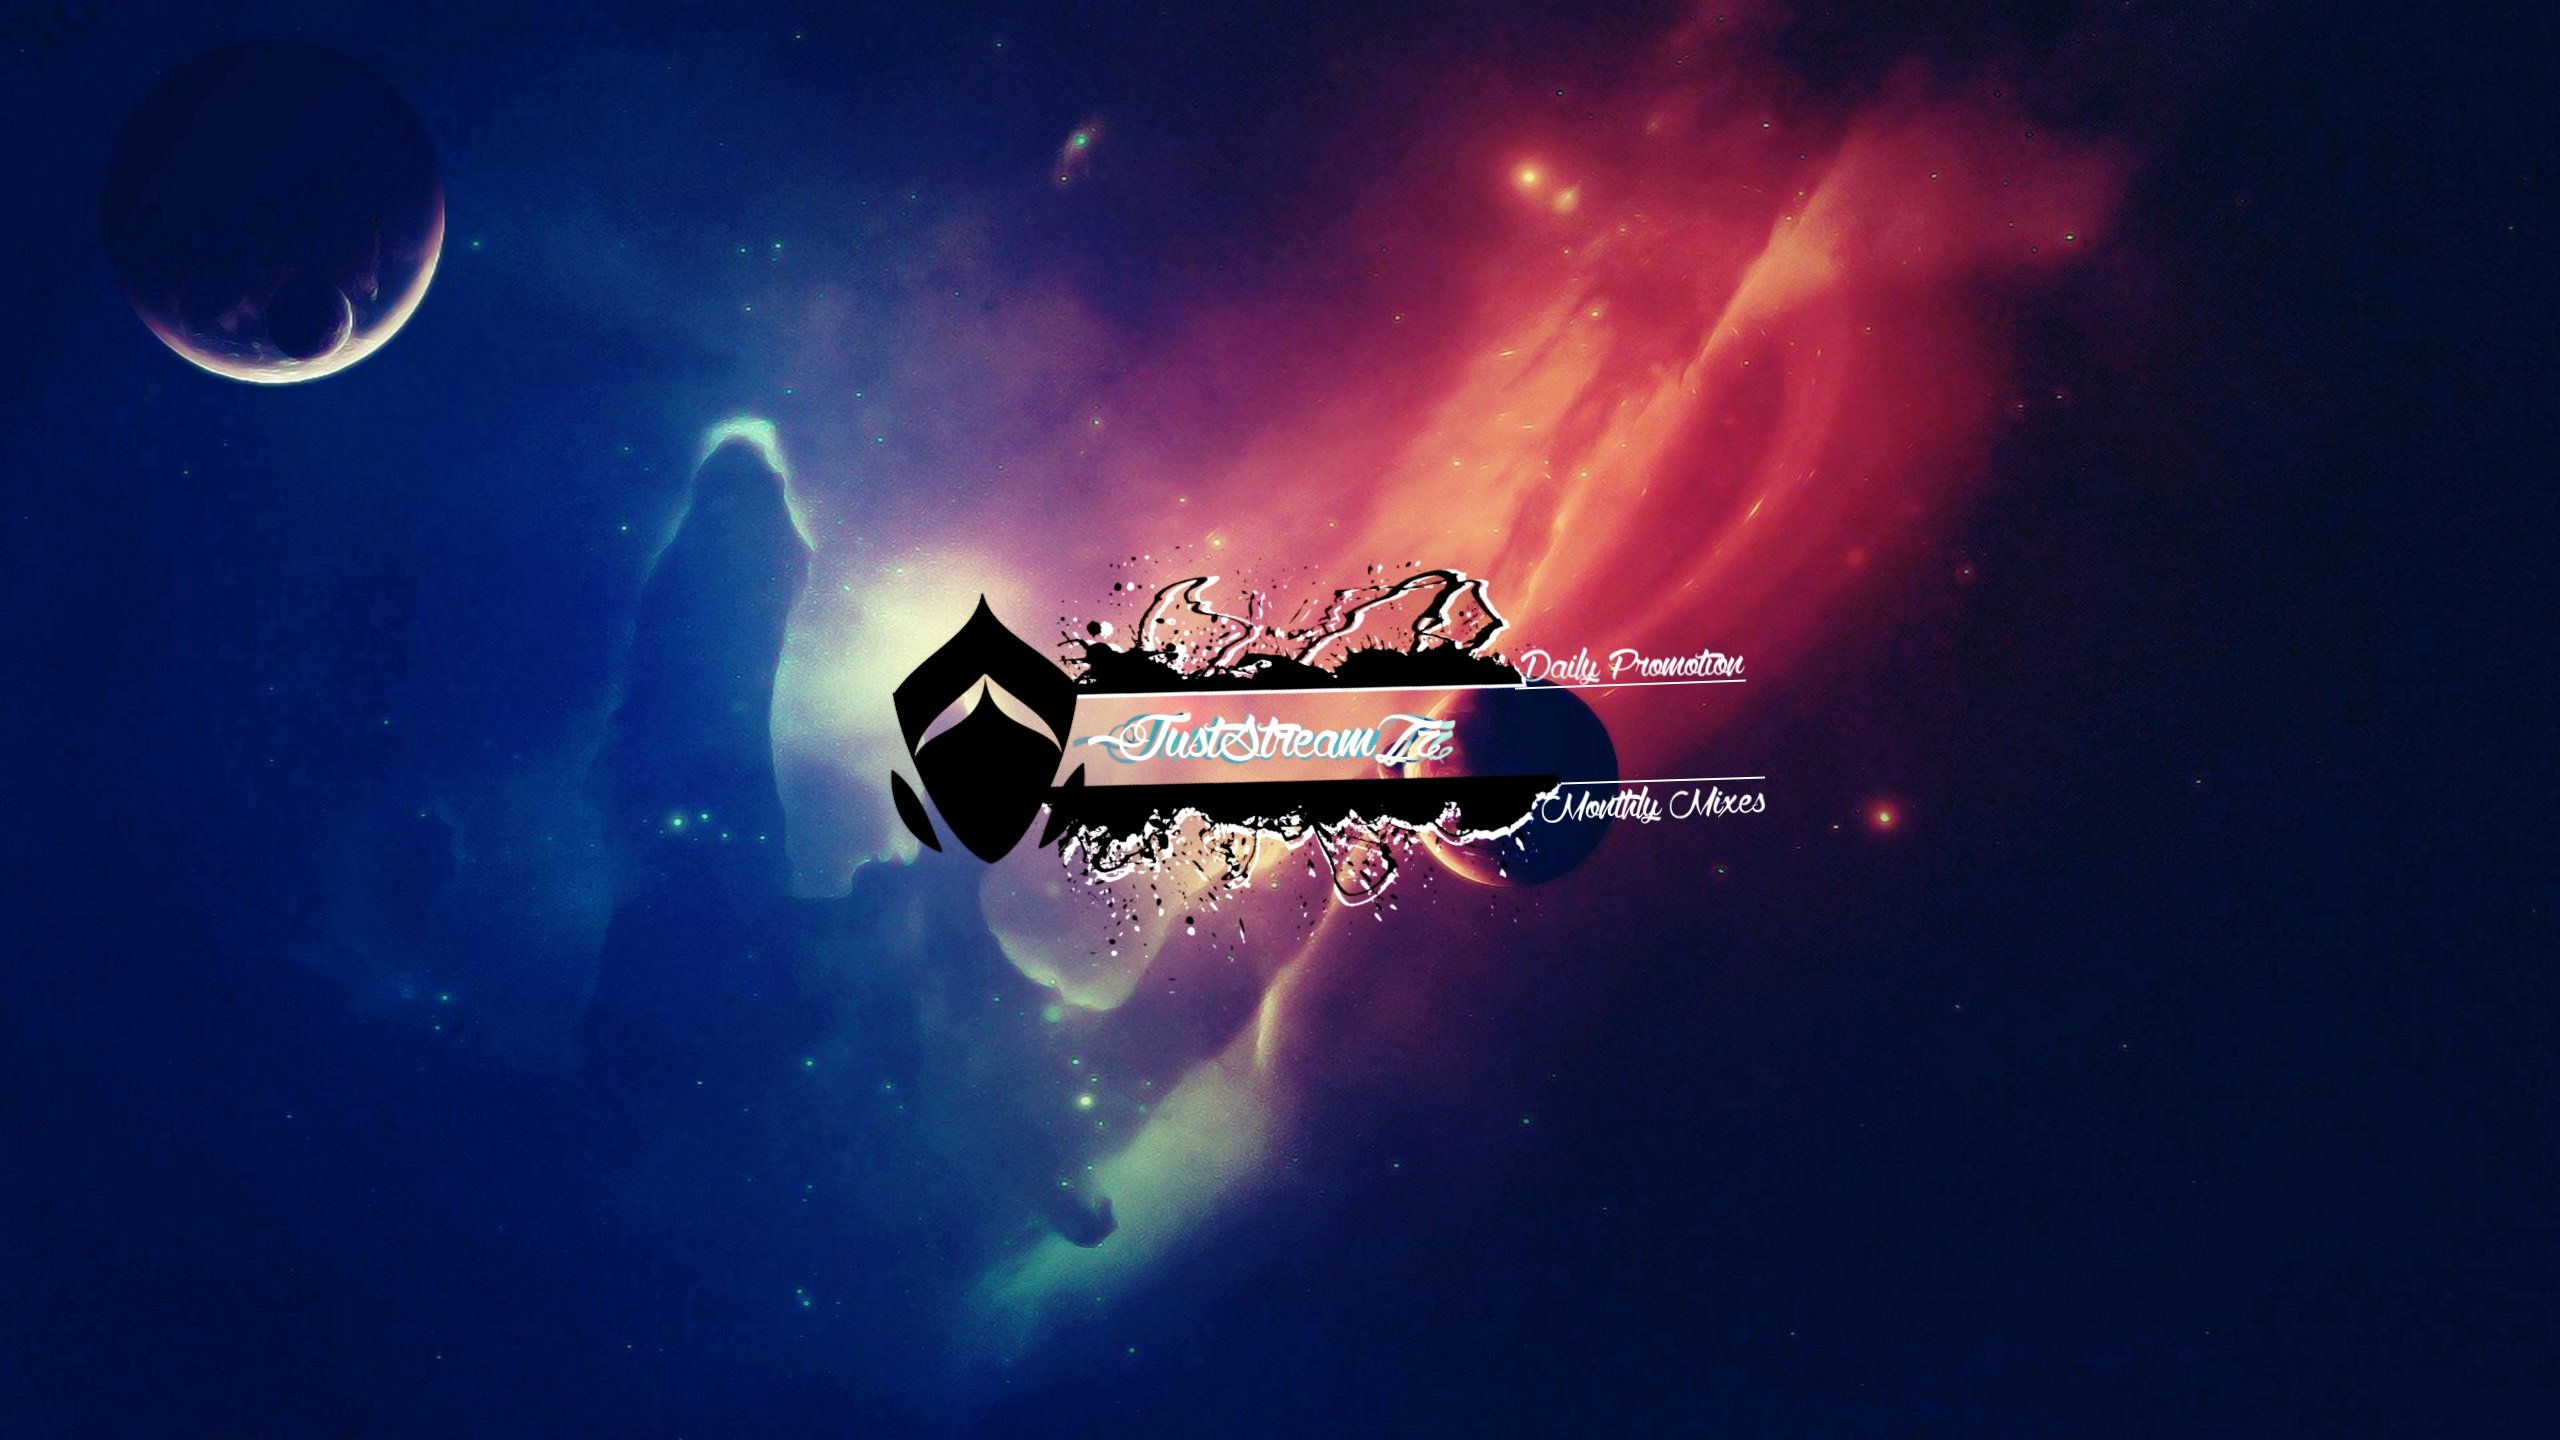 Banner Great Apollo Space Universe Juststreamzz Artwork